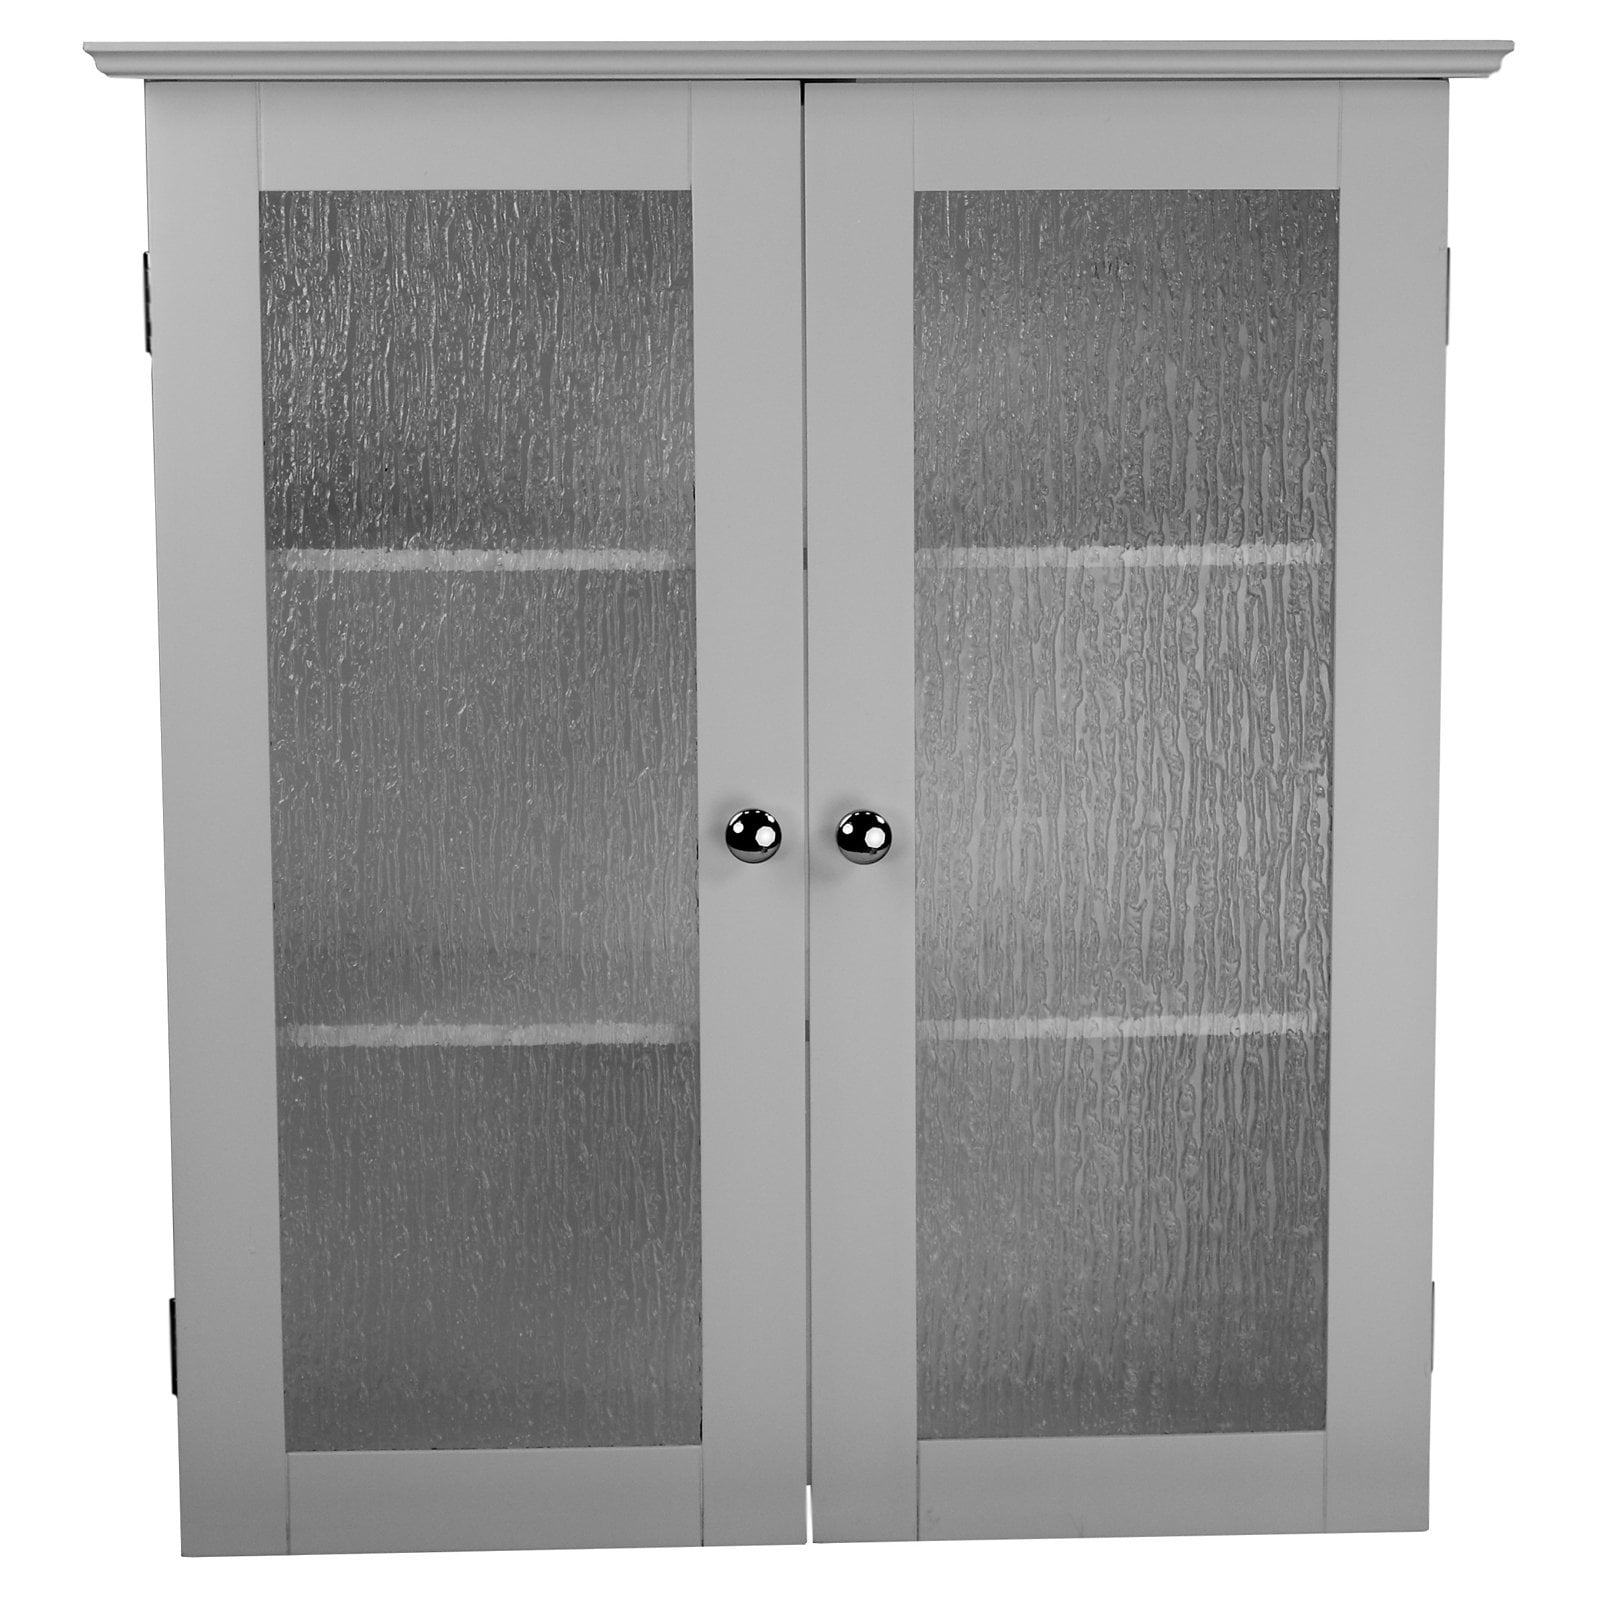 Connor Wall Cabinet with 2 Glass Doors, White - Walmart.com